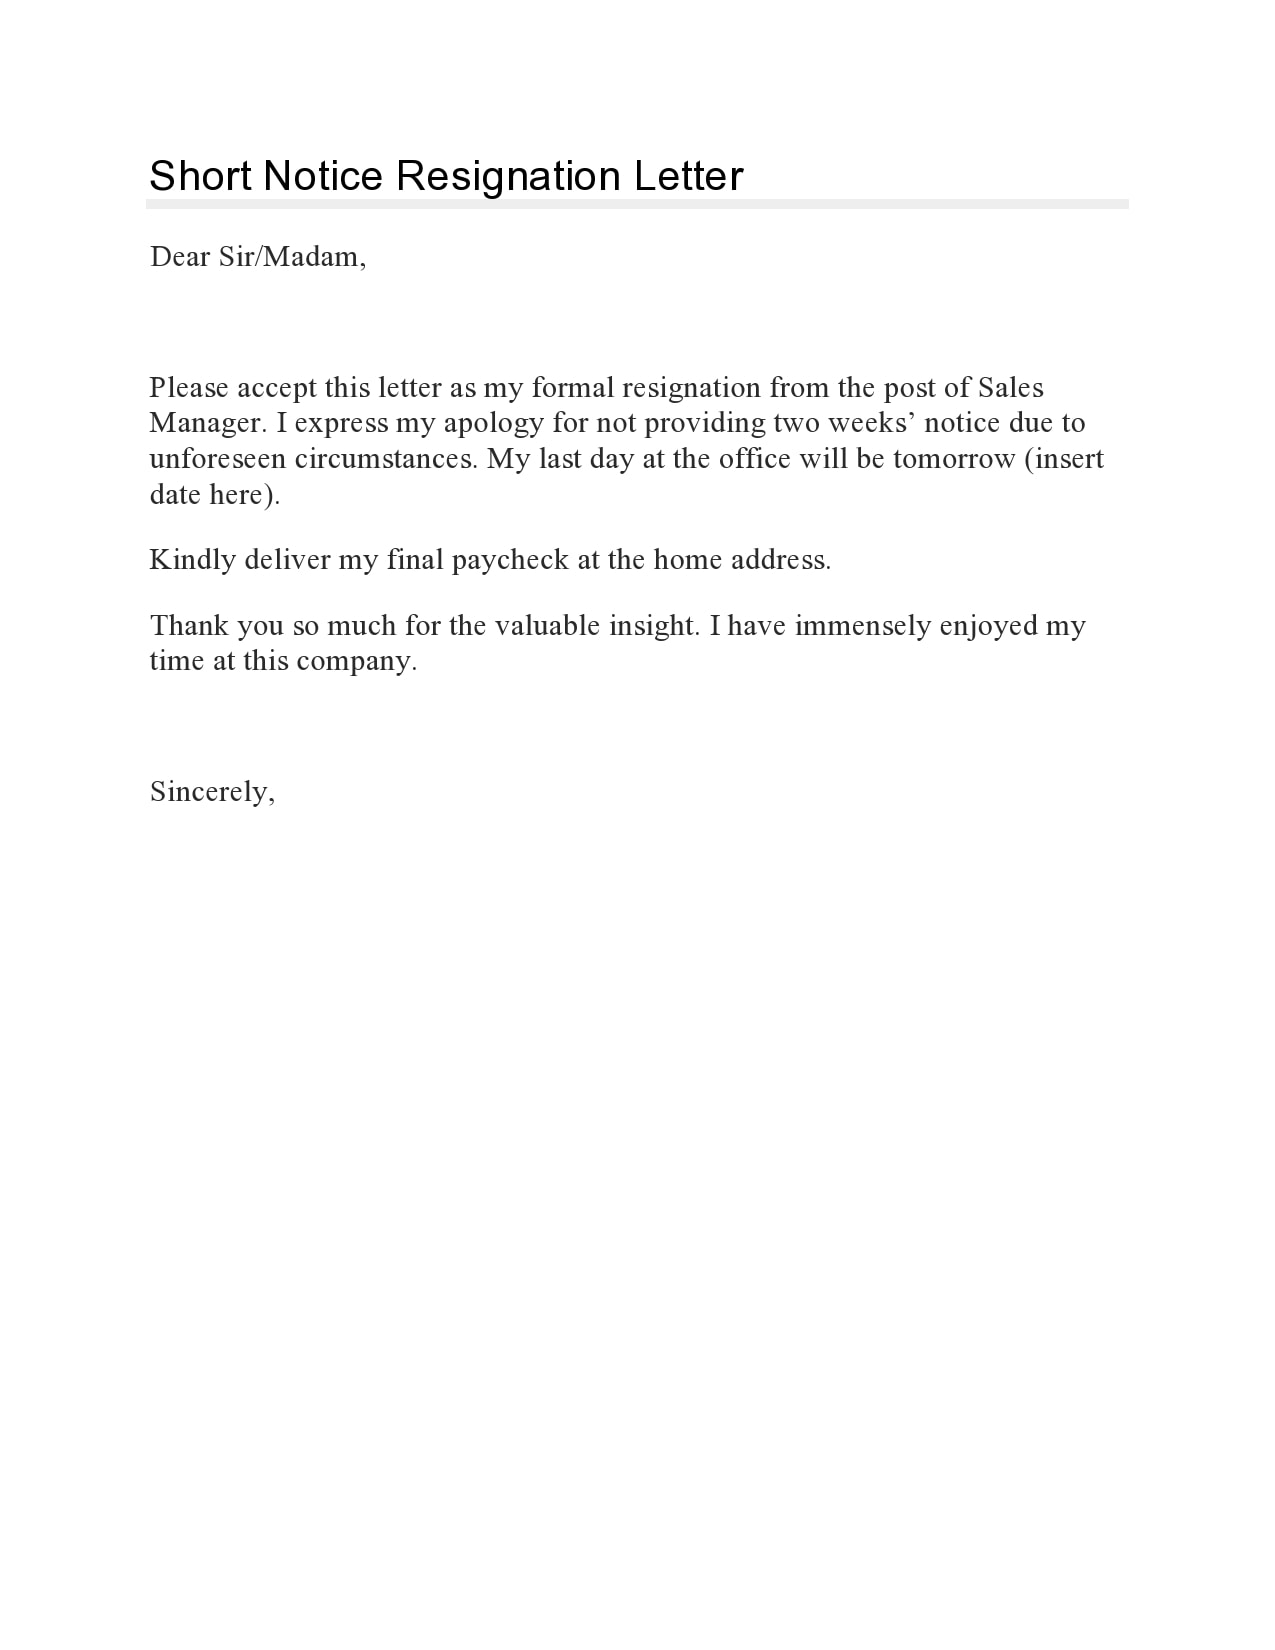 21+ Short Notice Resignation Letters (FREE) - TemplateArchive Within 2 Weeks Notice Template Word